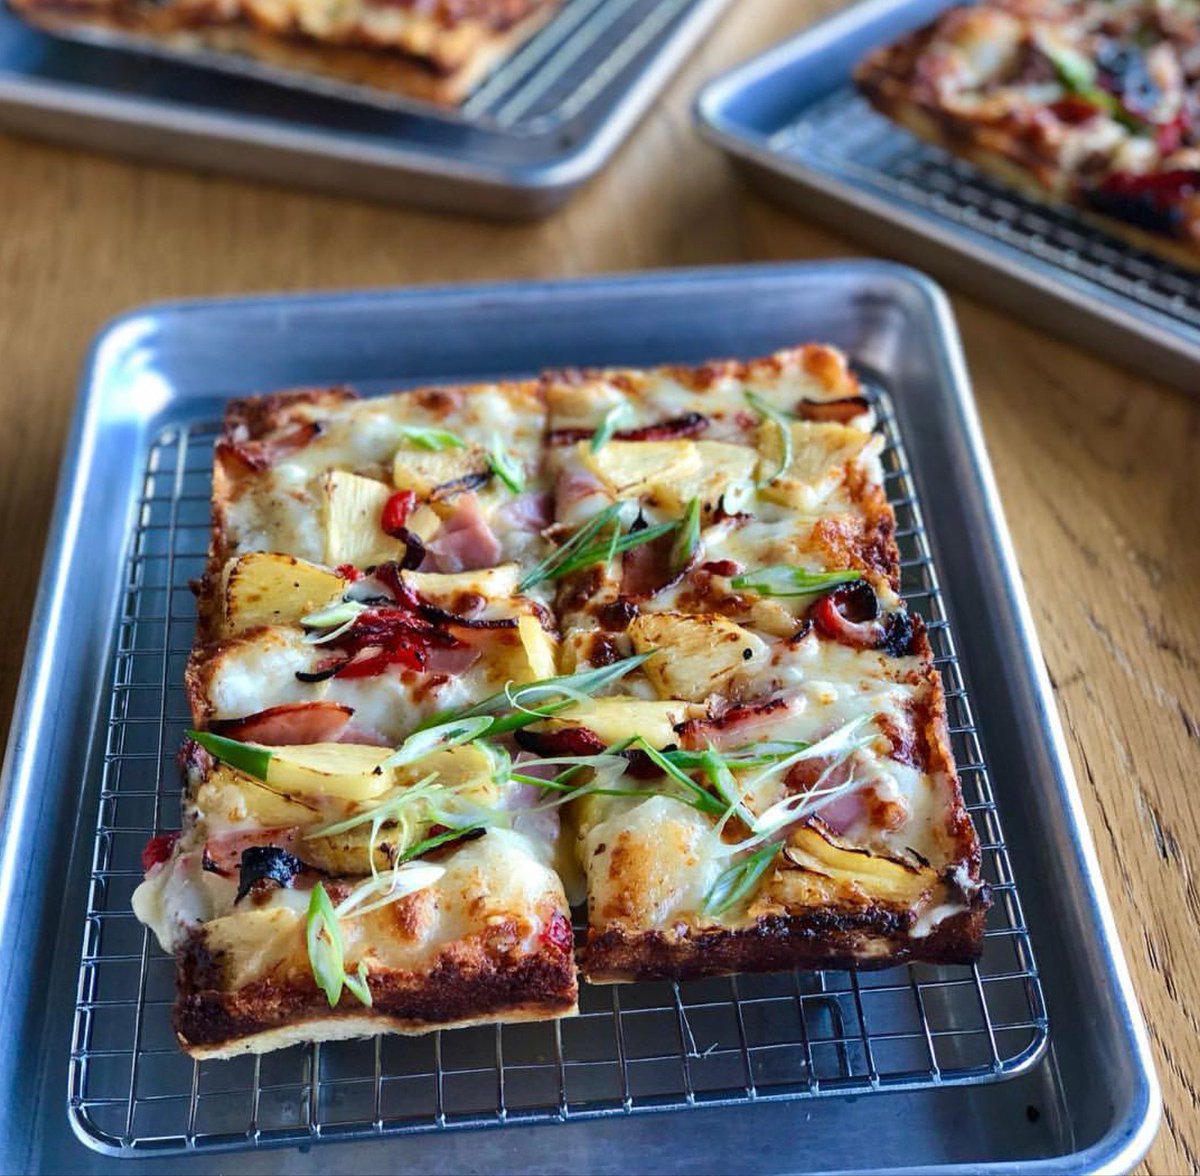 There's a pizza for everyone at The Corner. This one here is The Super Fly - a white pie topped with ham, pickled pineapple (YES!), red bell pepper, and plenty of shaved scallion. Did we mention LUNCH SPECIALS, too? We'll see you 'round the table.